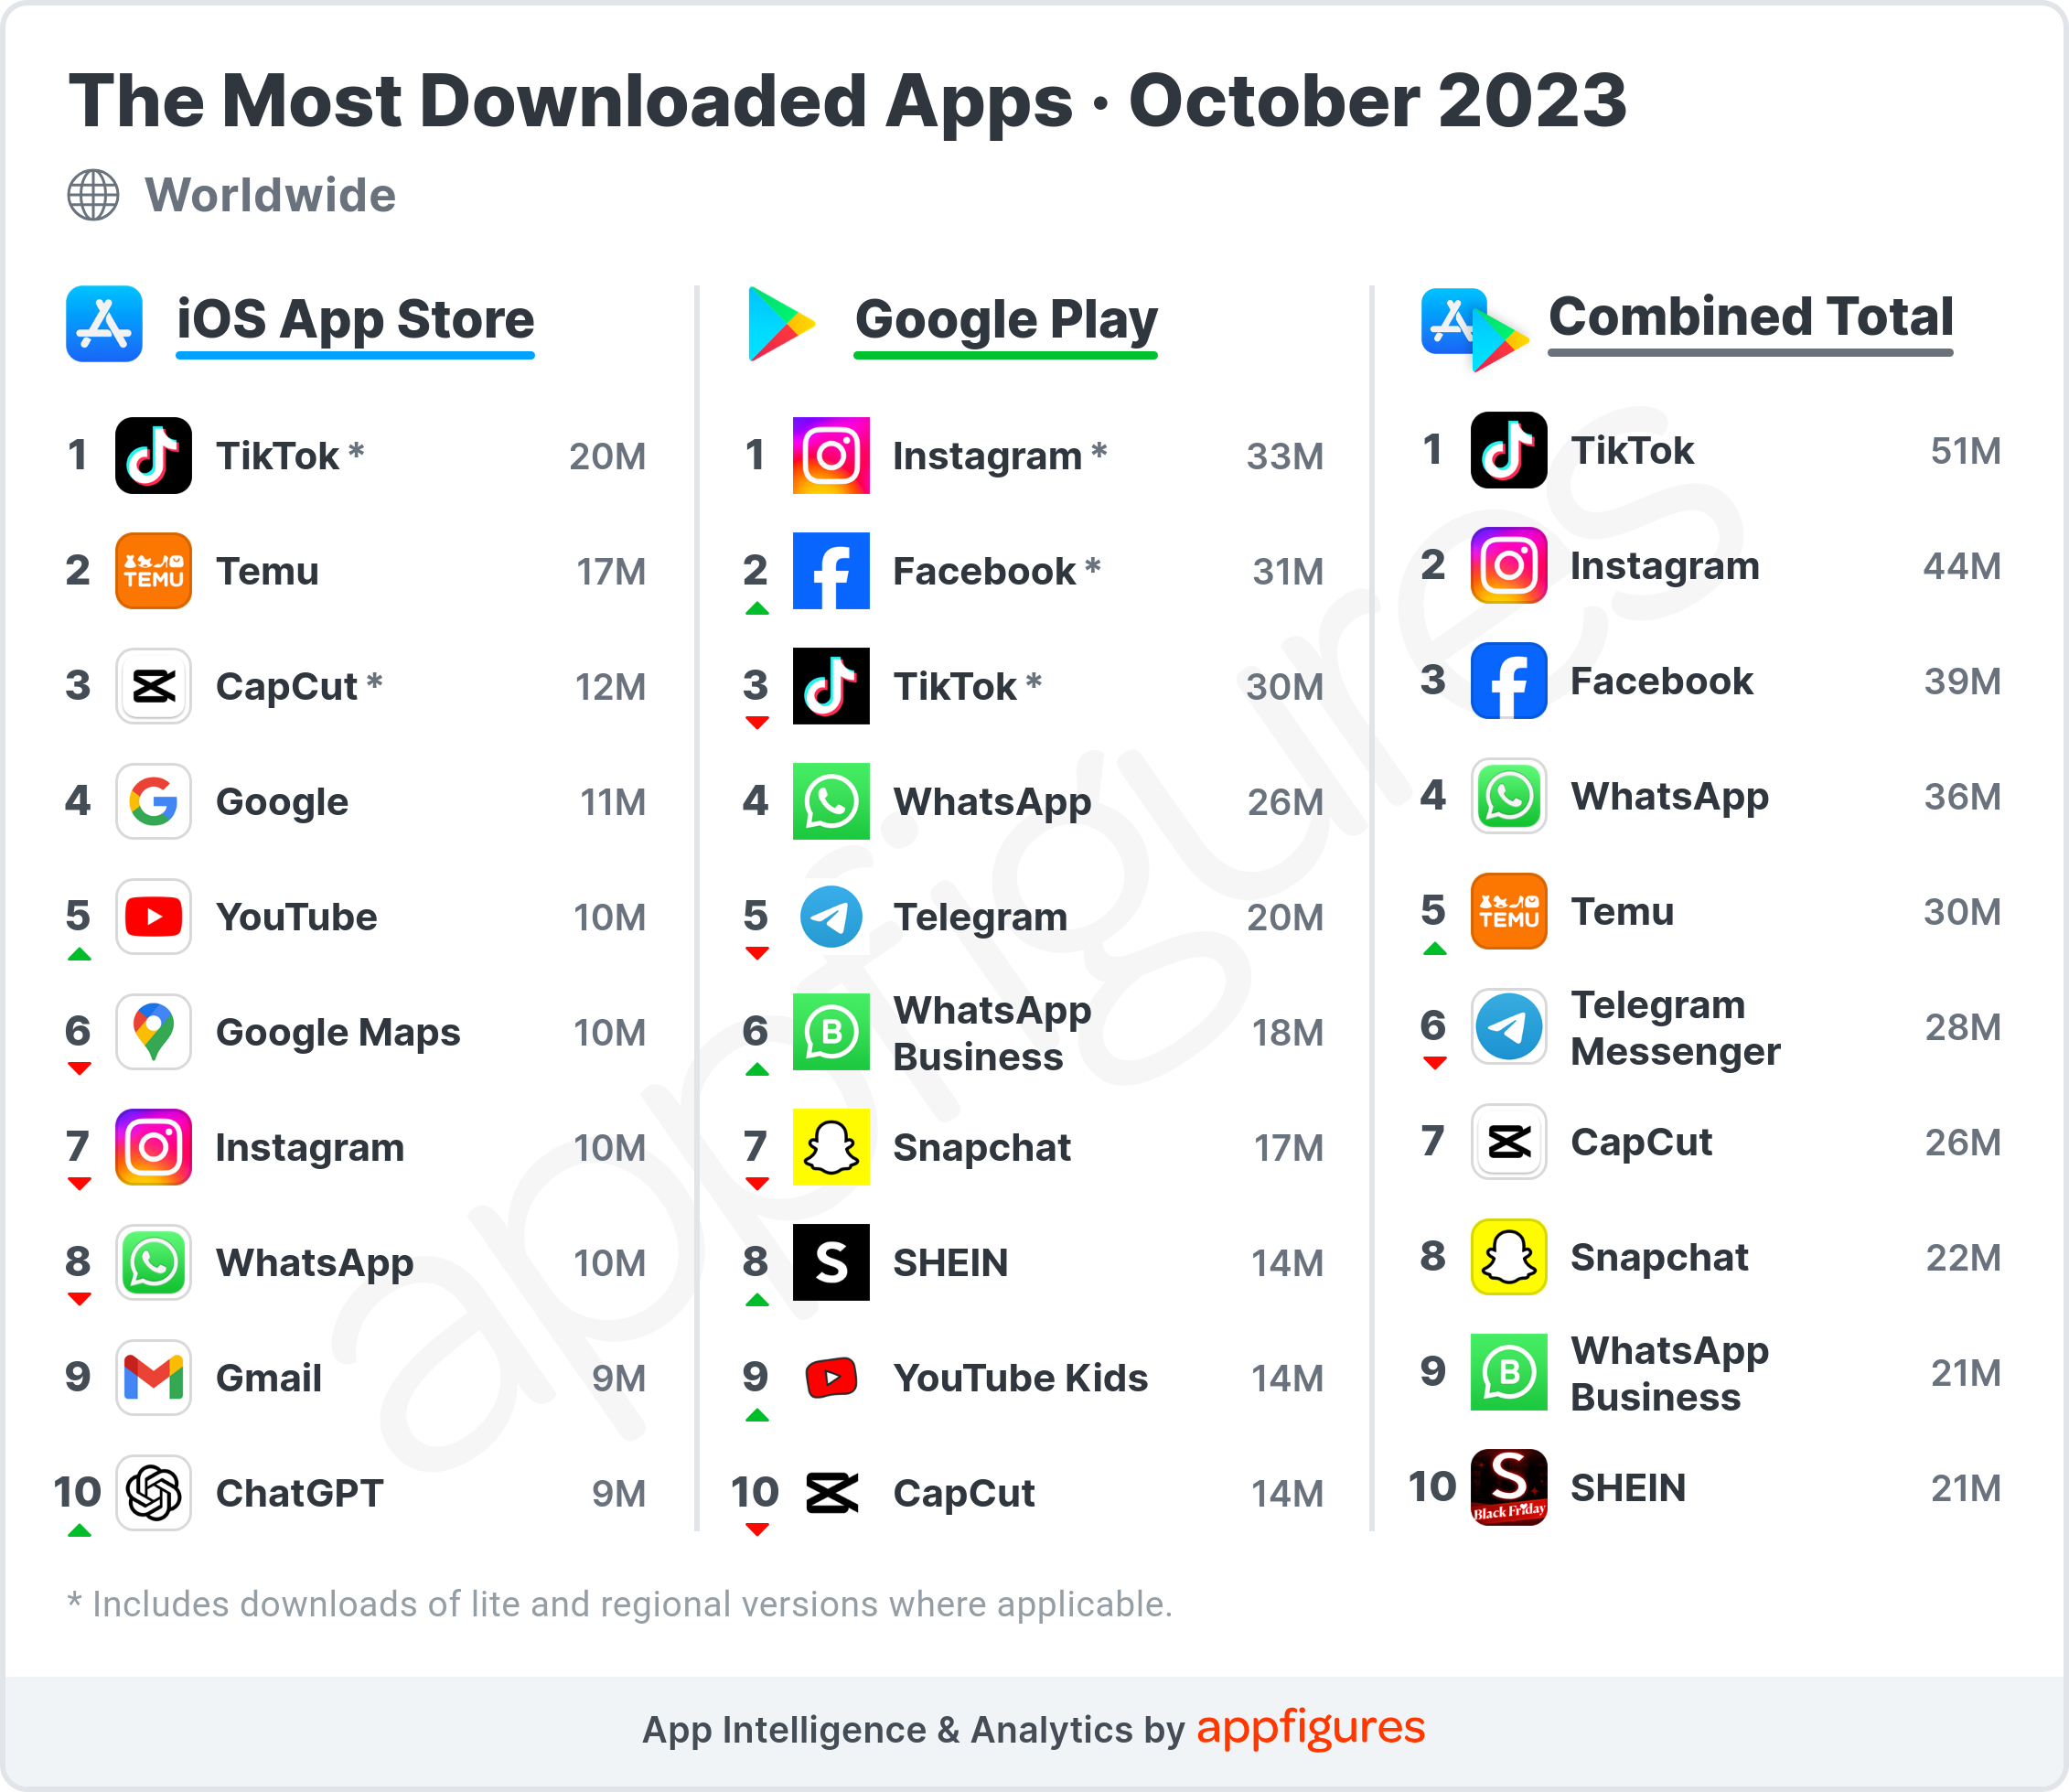 Downloads Continue to Grow in October - The Most Downloaded Apps in the World